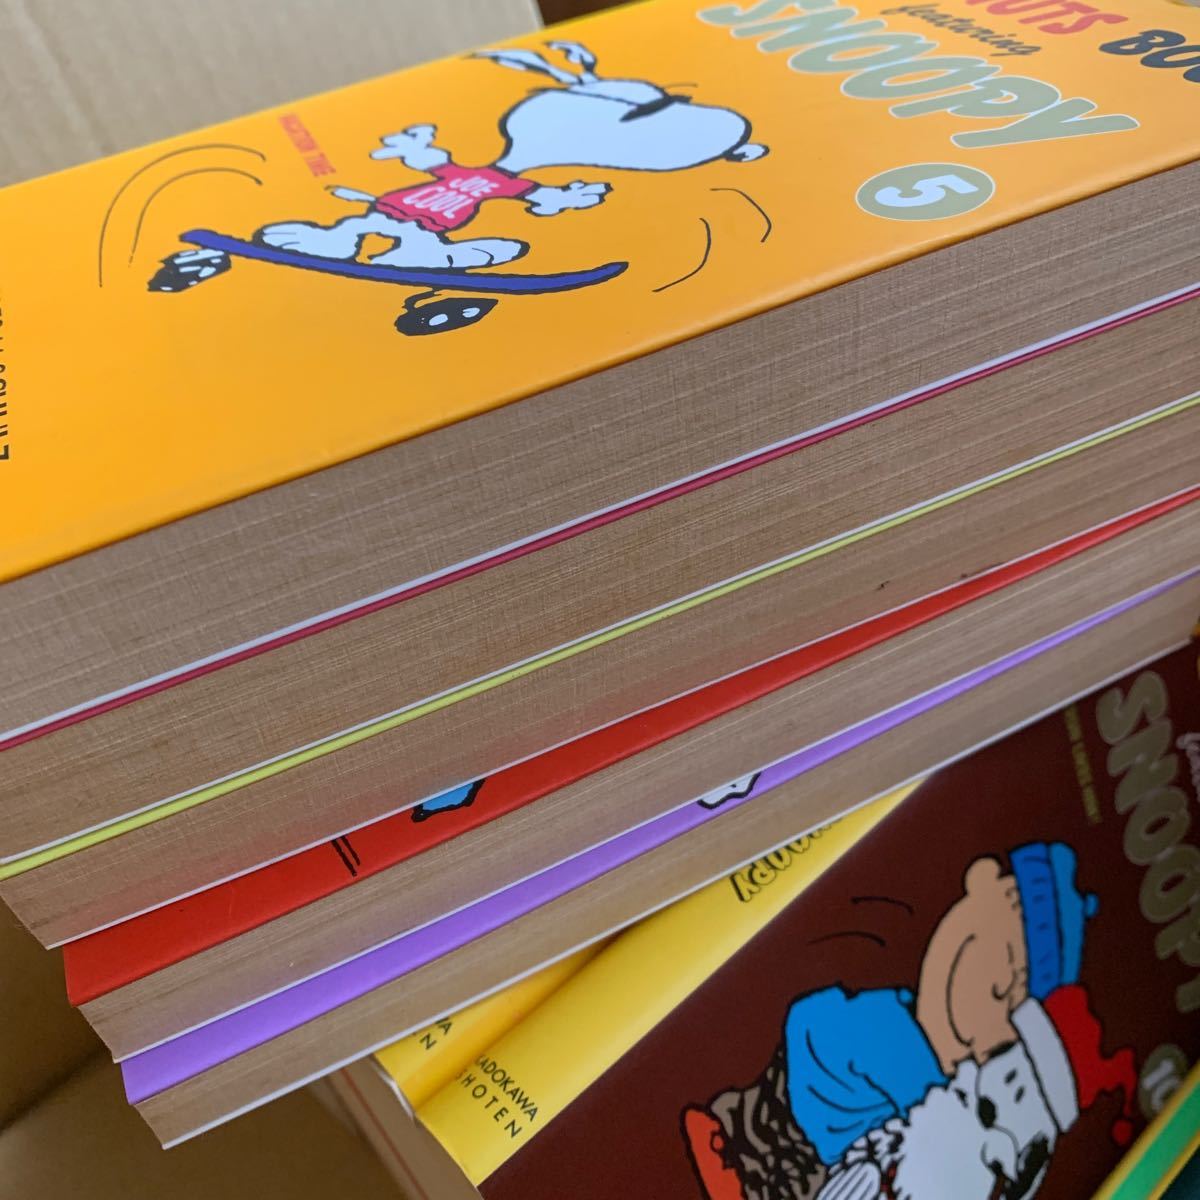 a peanuts book  スヌーピー SNOOPY PEANUTS 洋書　マンガ　漫画　19冊セット　ペーパーバック